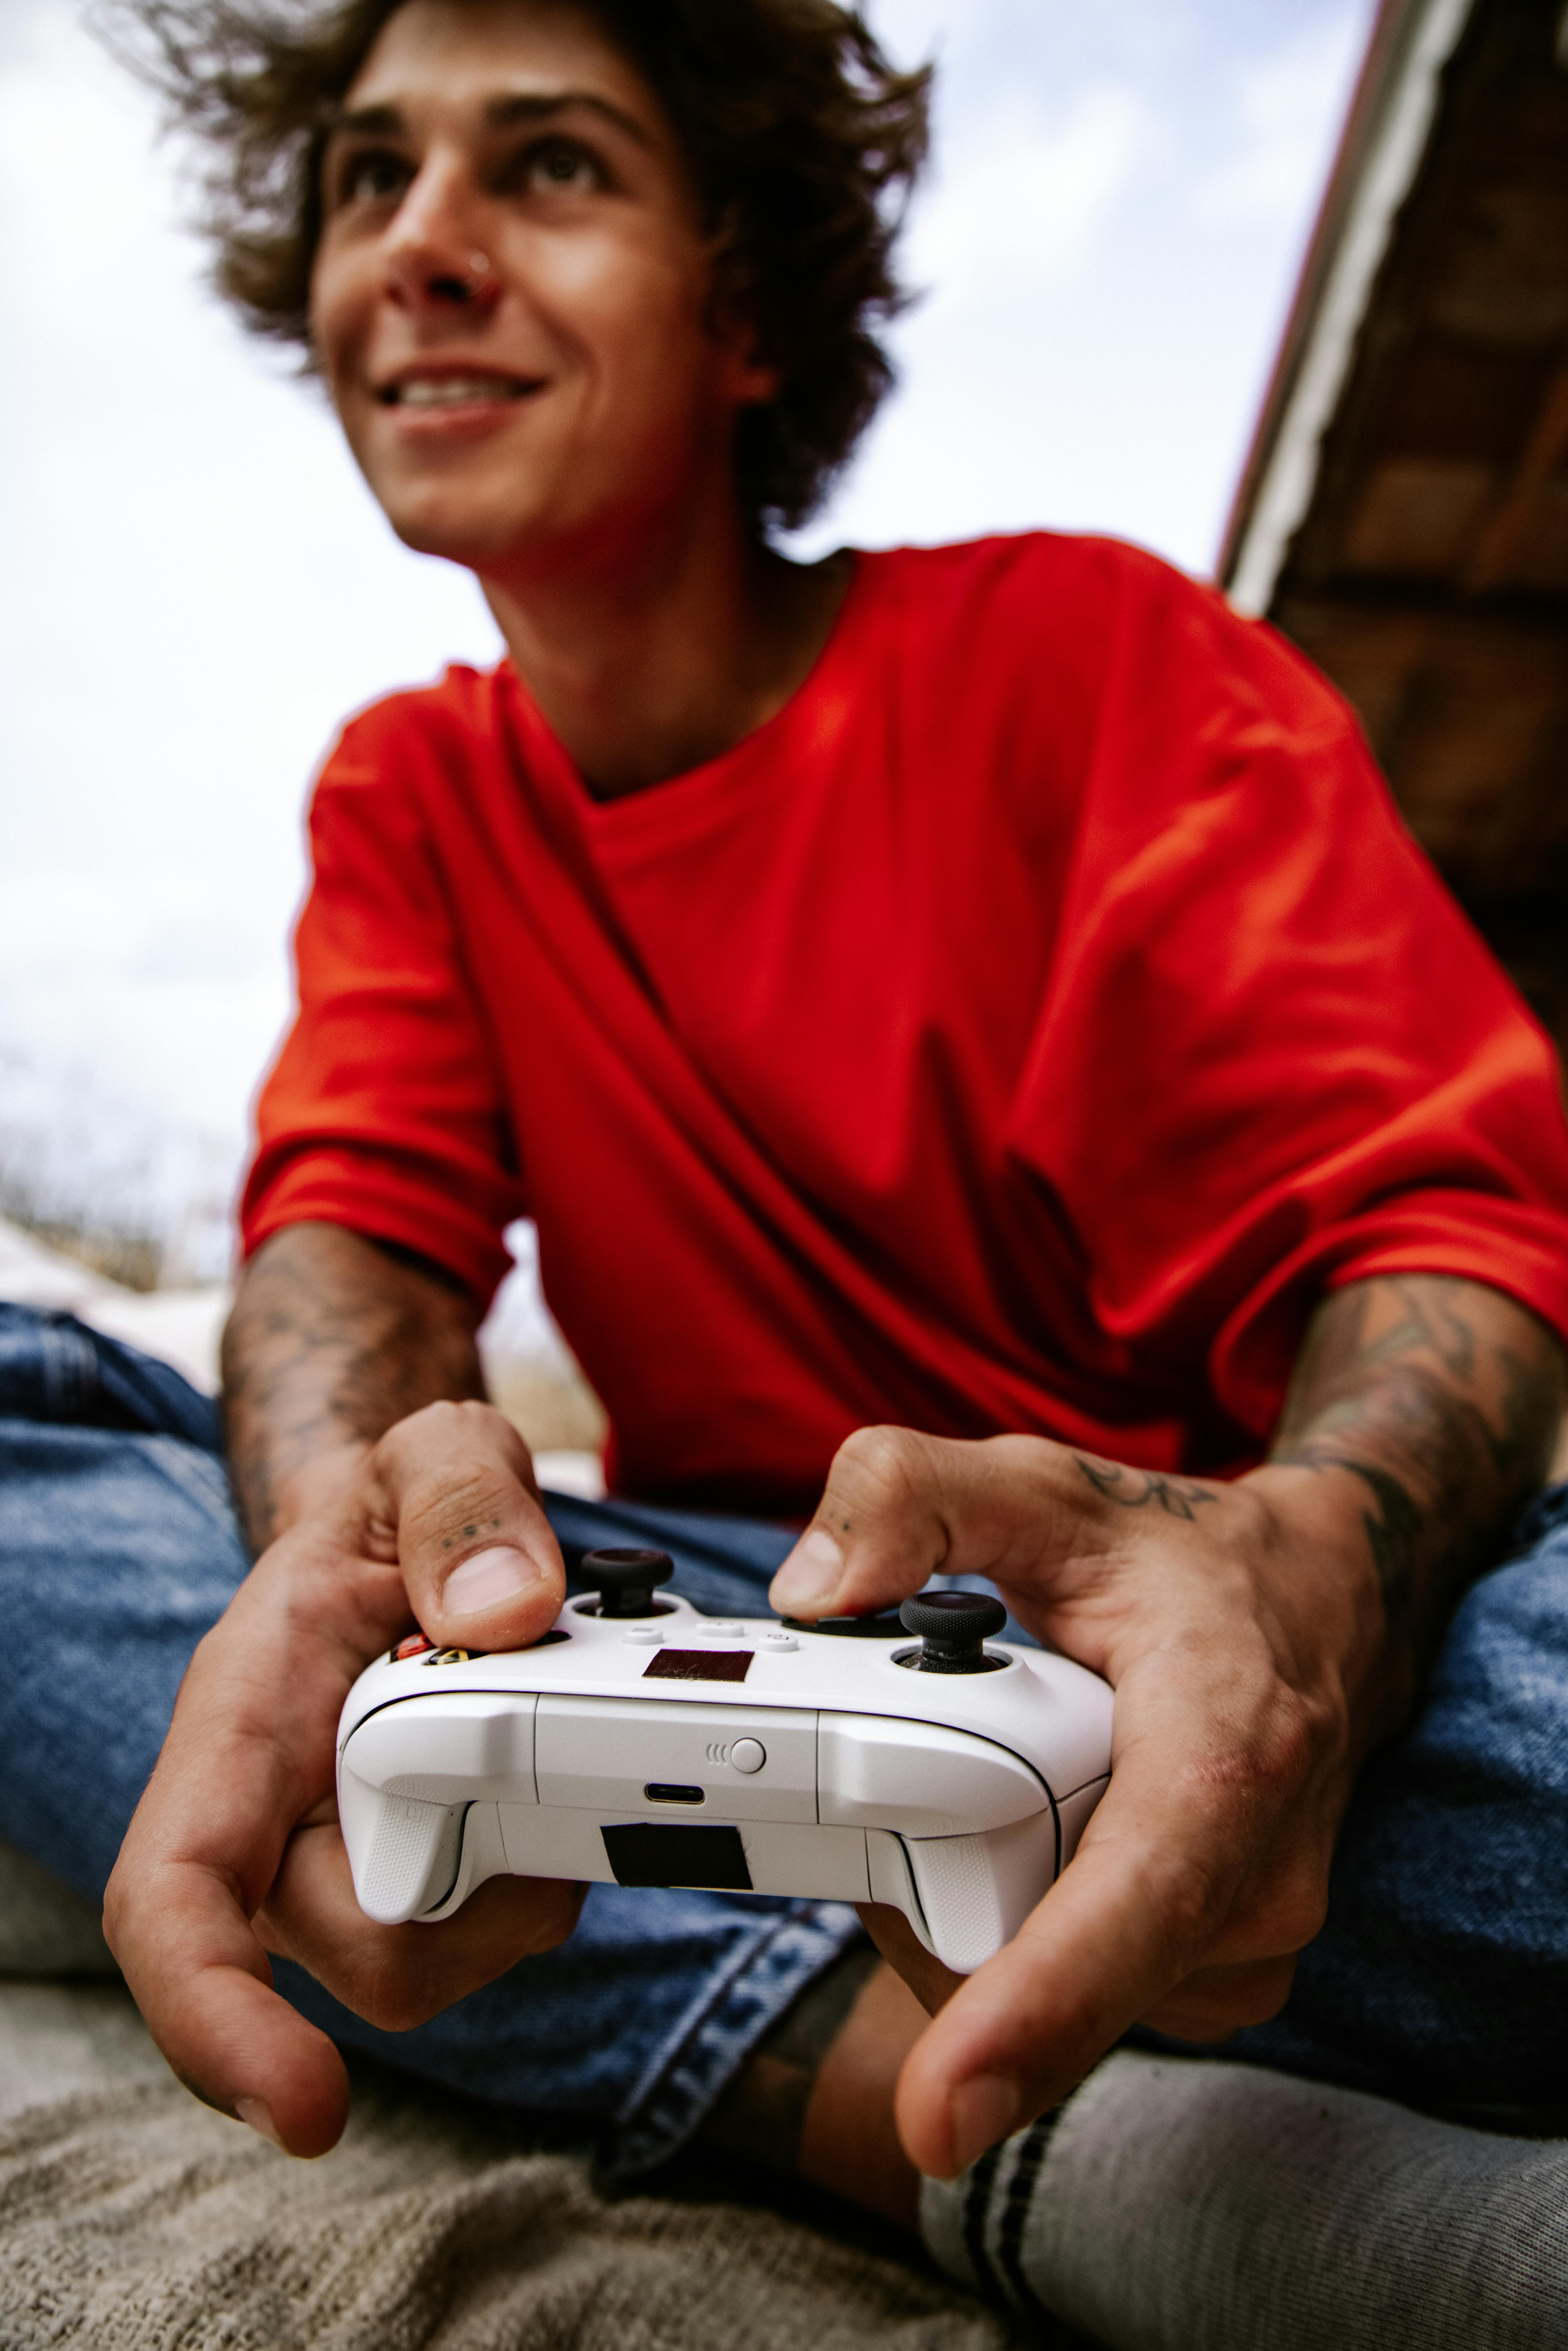 Try this One. Man Playing Video Game with Controller. Bearded Man Using  Virtual Reality Gamepad Stock Image - Image of game, gamepad: 213827793